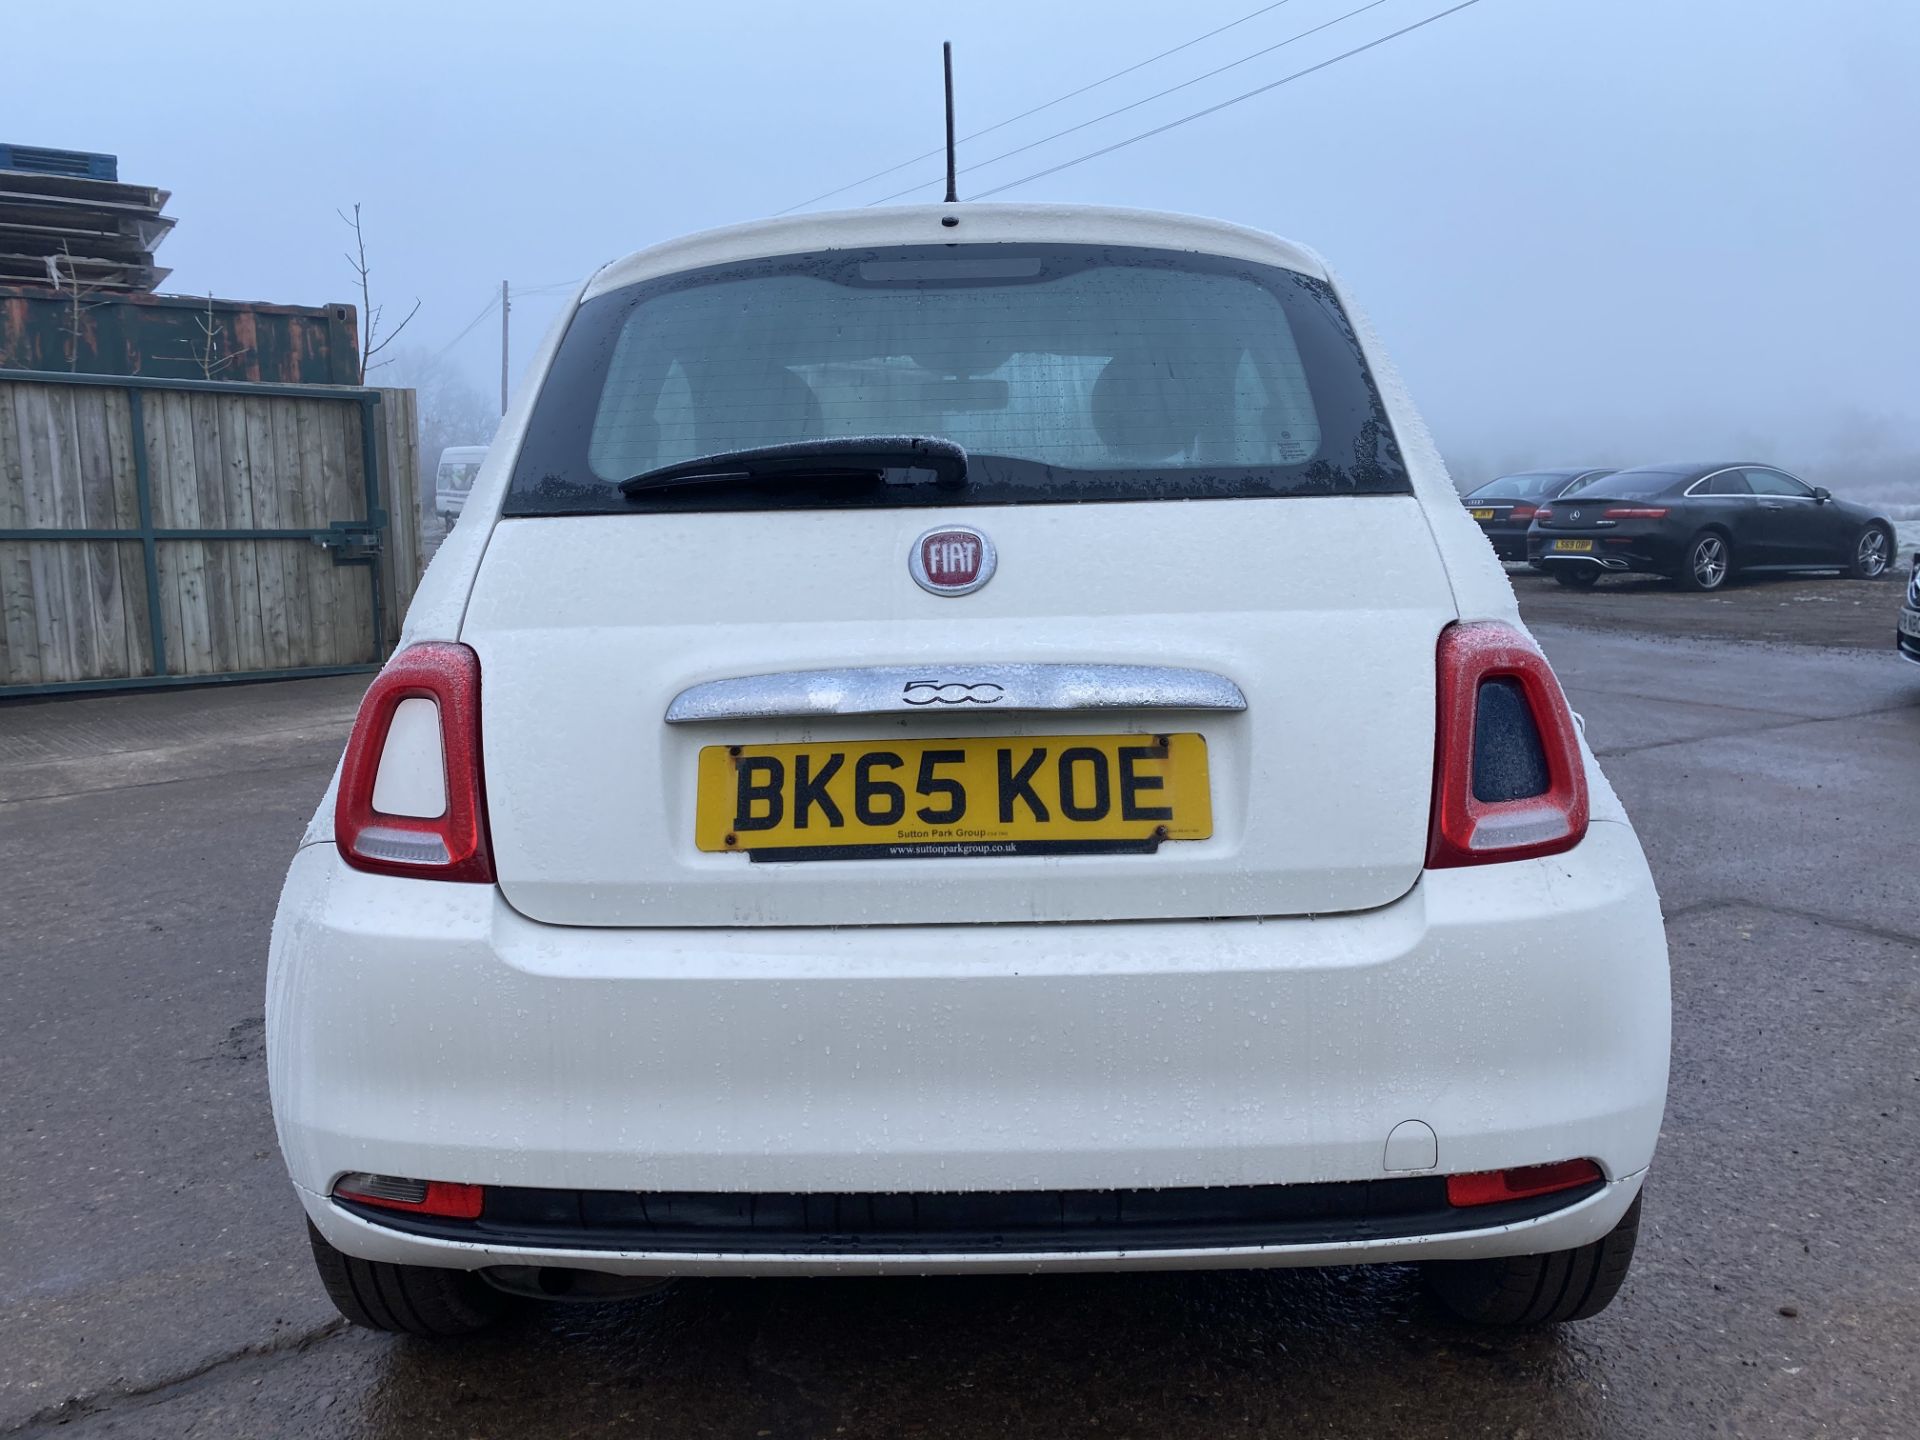 On Sale FIAT 500 "POP" 1.2 PETROL - 2016 MODEL - 1 KEEPER - ONLY 44K MILES FROM NEW - AIR CON - LOOK - Image 7 of 18